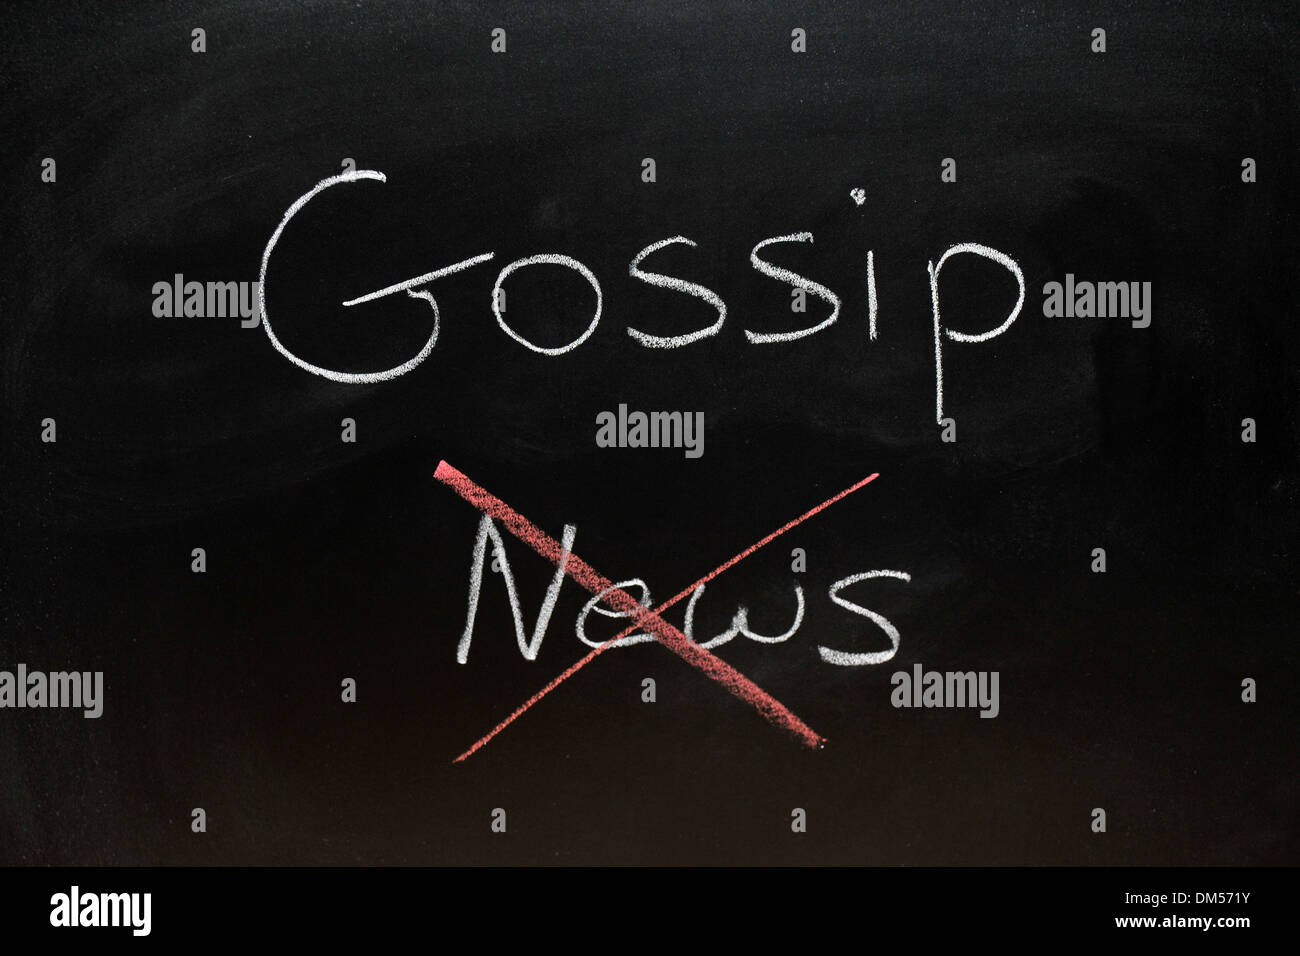 Gossip News drawn on a blackboard in chalk with News crossed out. Stock Photo